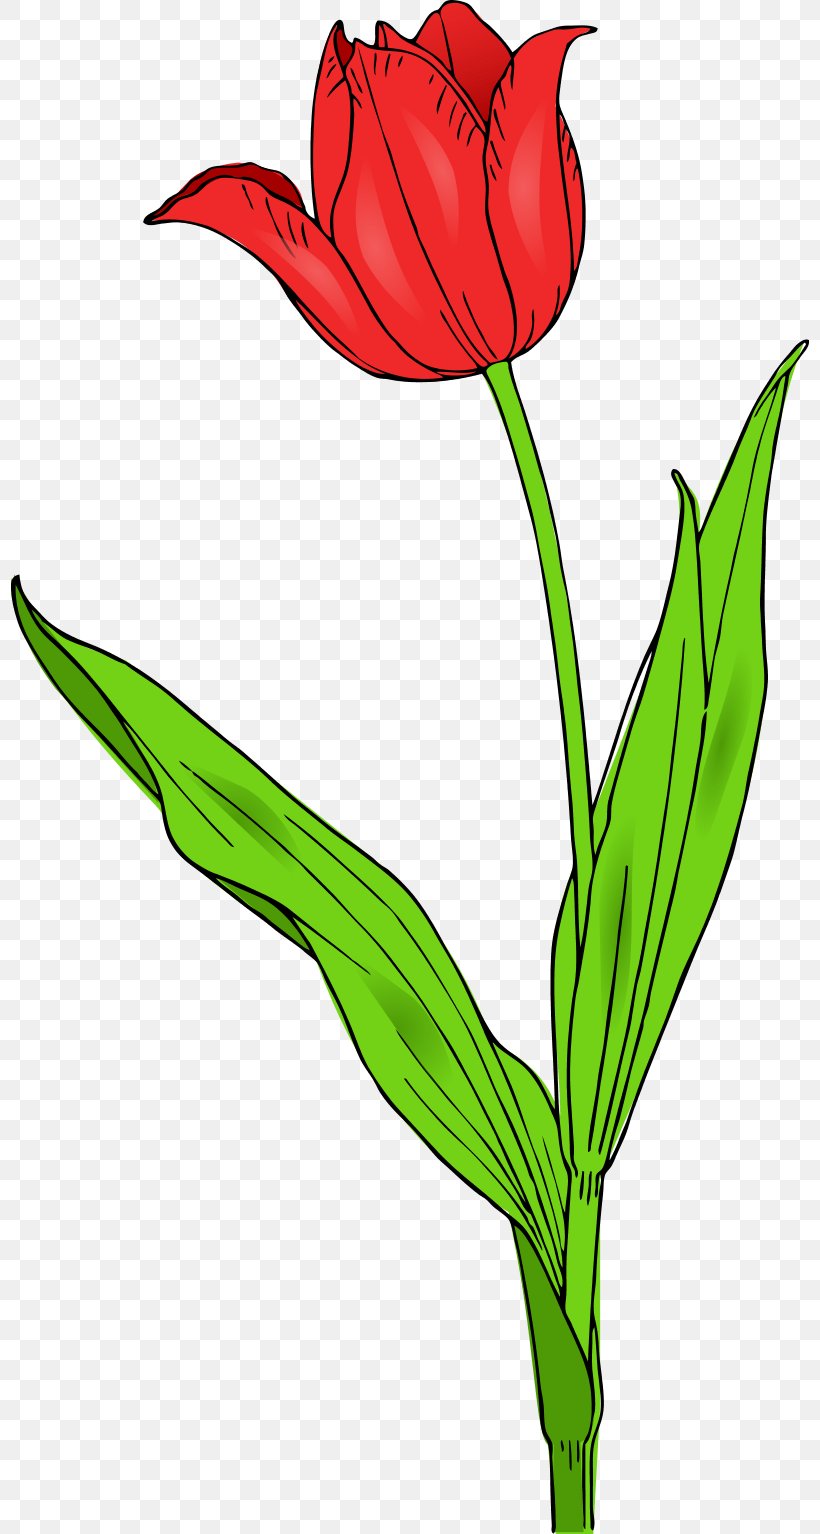 Tulipa Gesneriana Free Content Flower Clip Art, PNG, 800x1534px, Tulipa Gesneriana, Art, Blog, Color, Cut Flowers Download Free